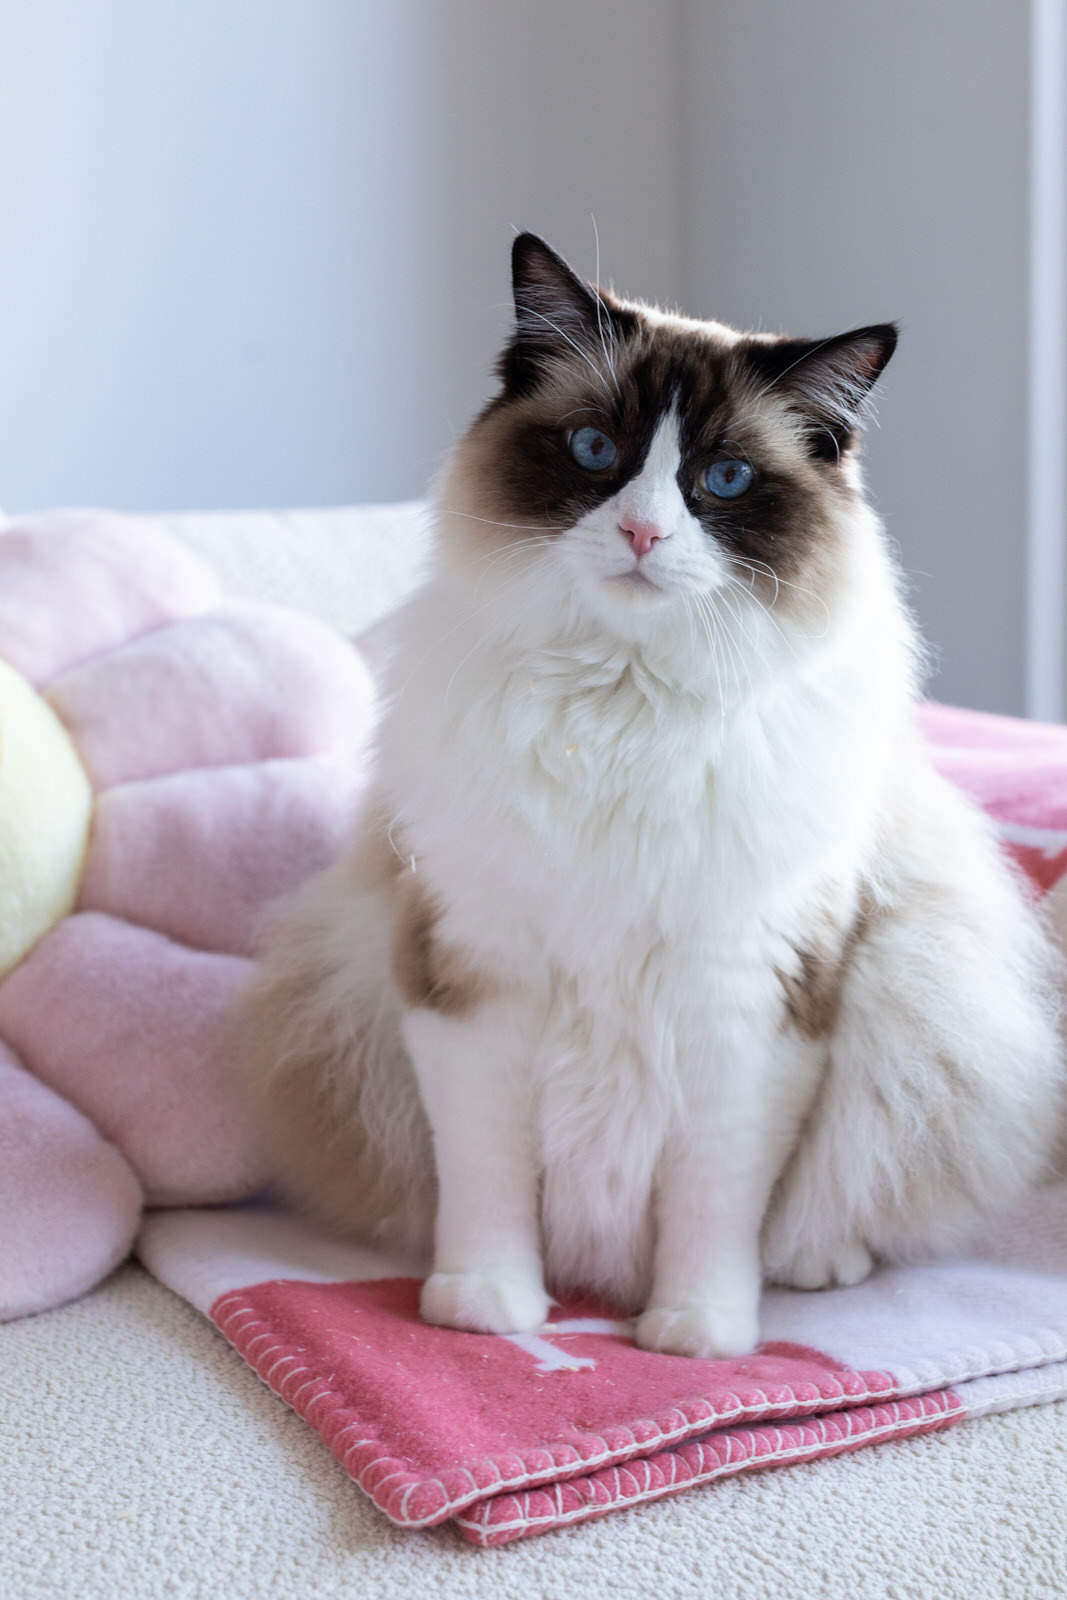 cute ragdoll cat sitting on pink and white blanket looking at the camera with piercing blue eyes